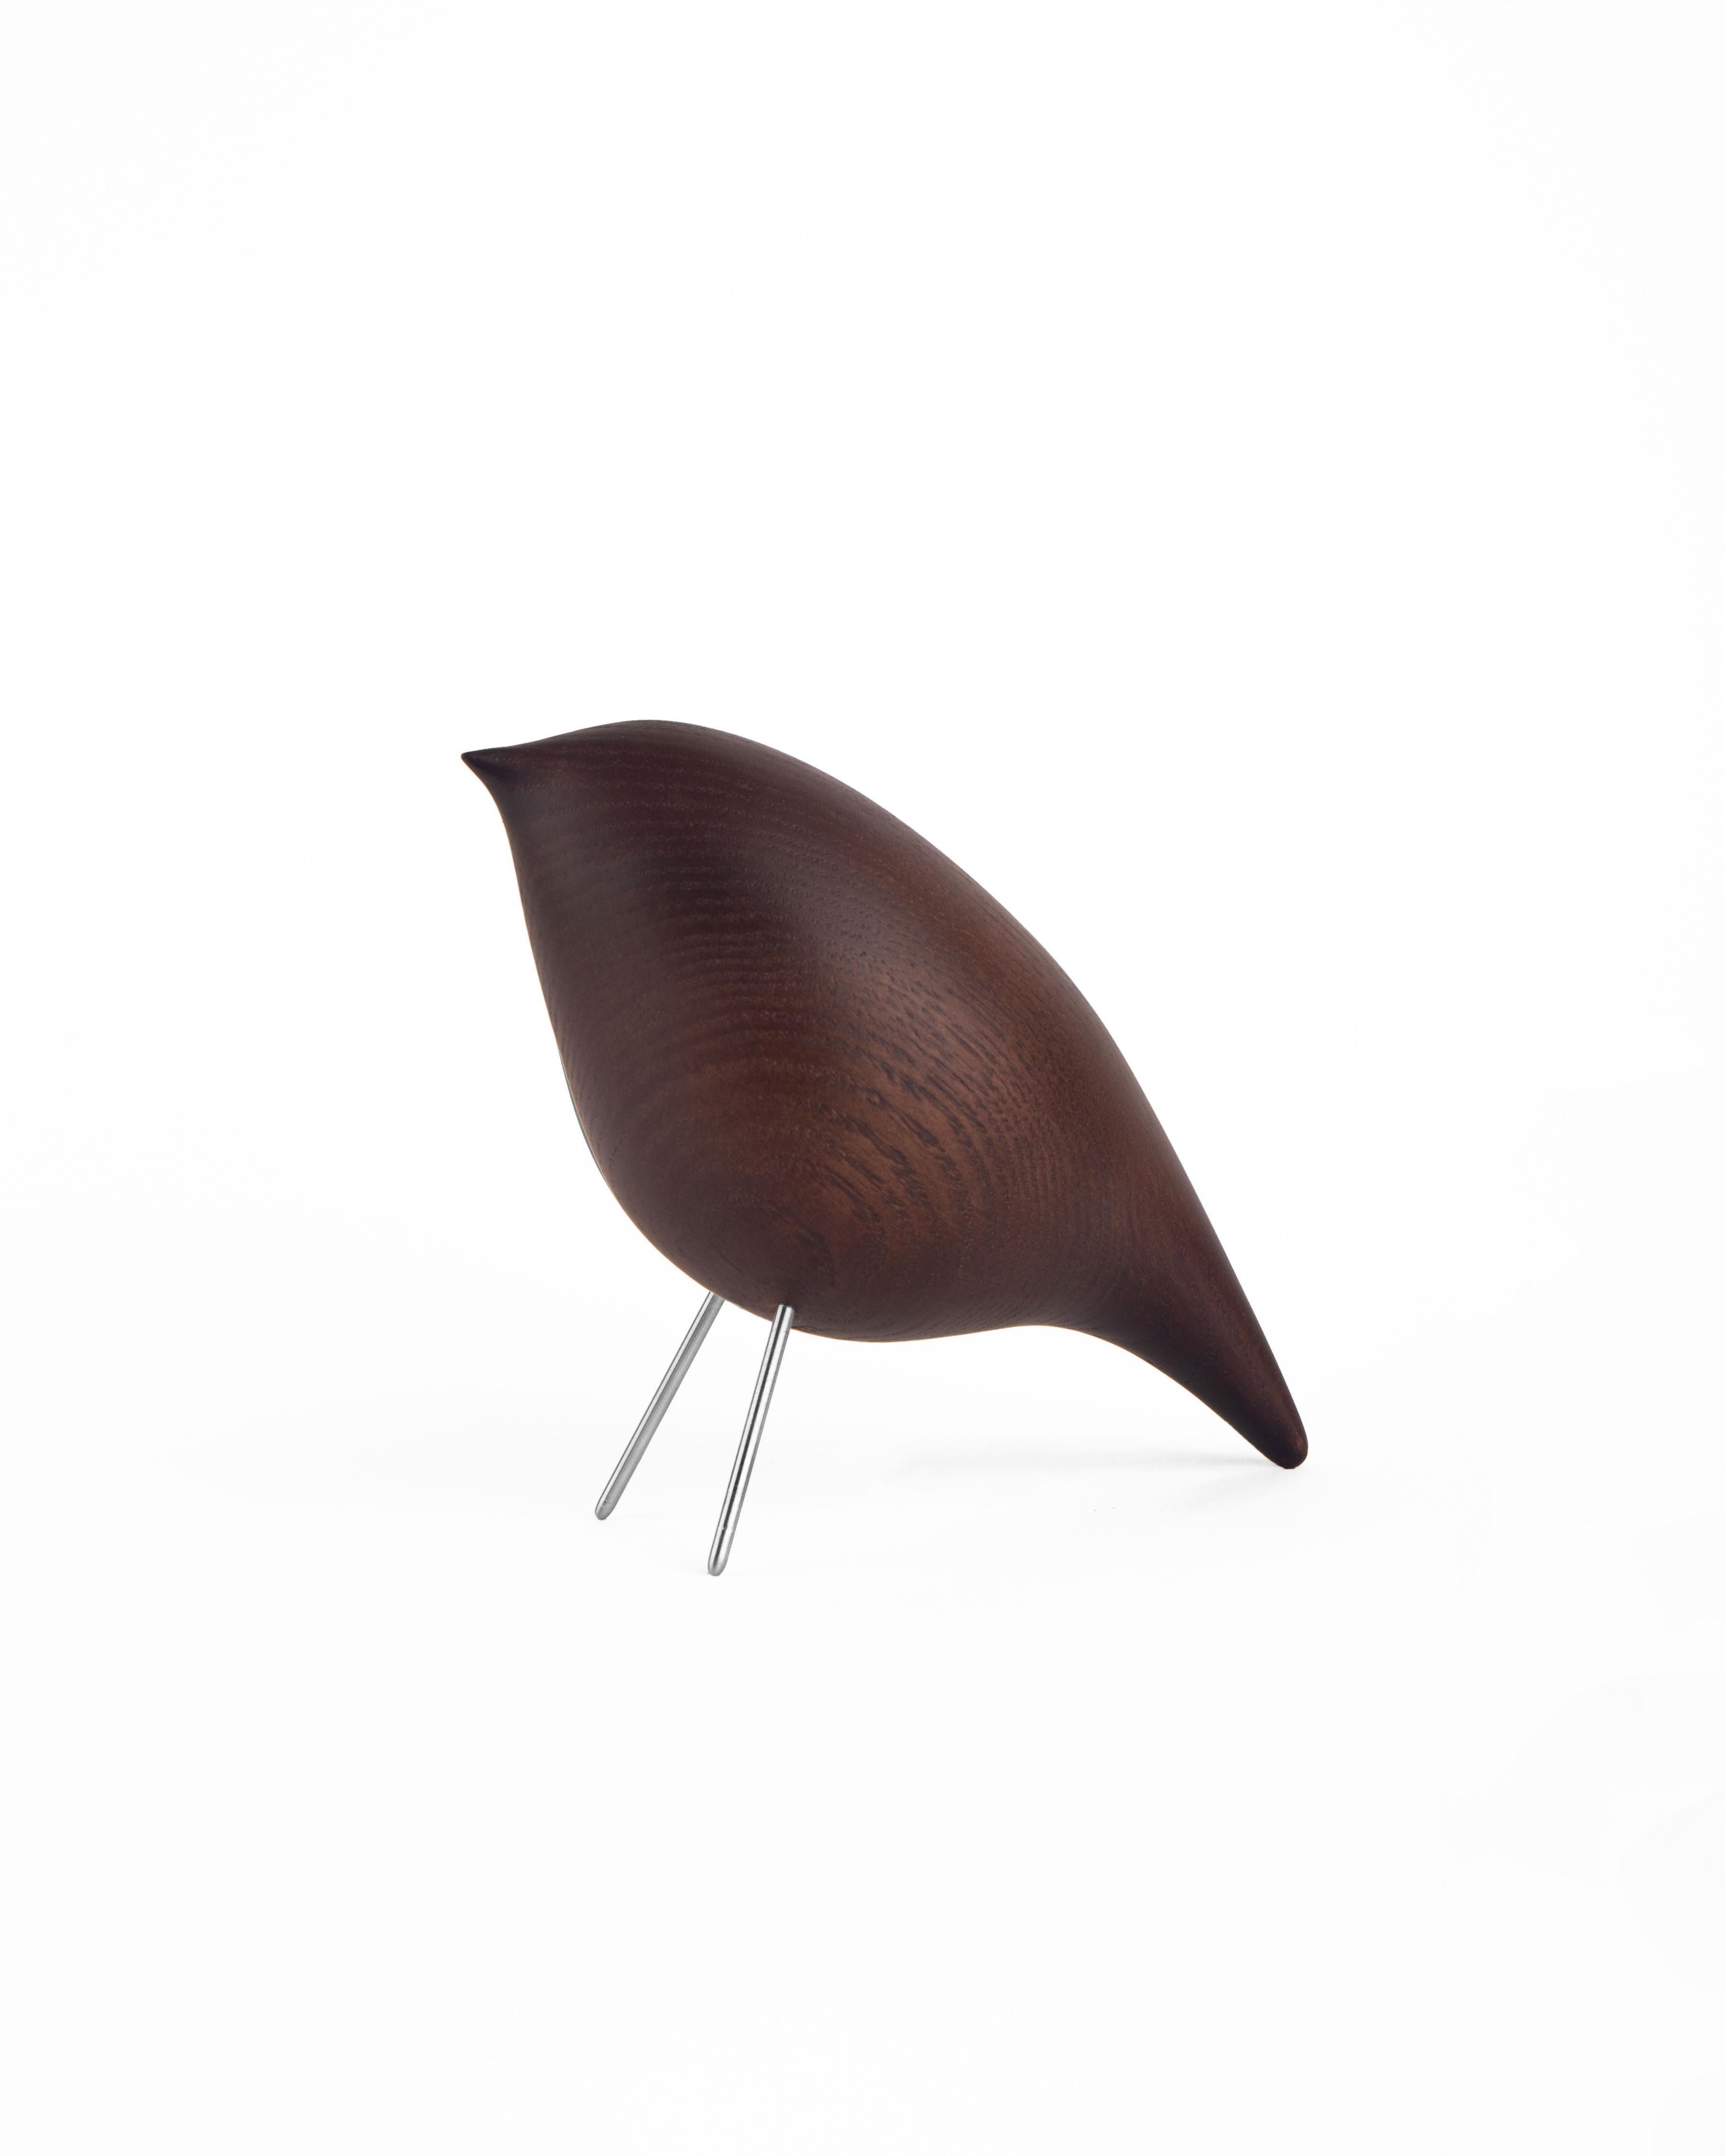 Contemporay Tweety Decorative Bird CS2 by Noom, Brown Ashwood, In stock For Sale 4